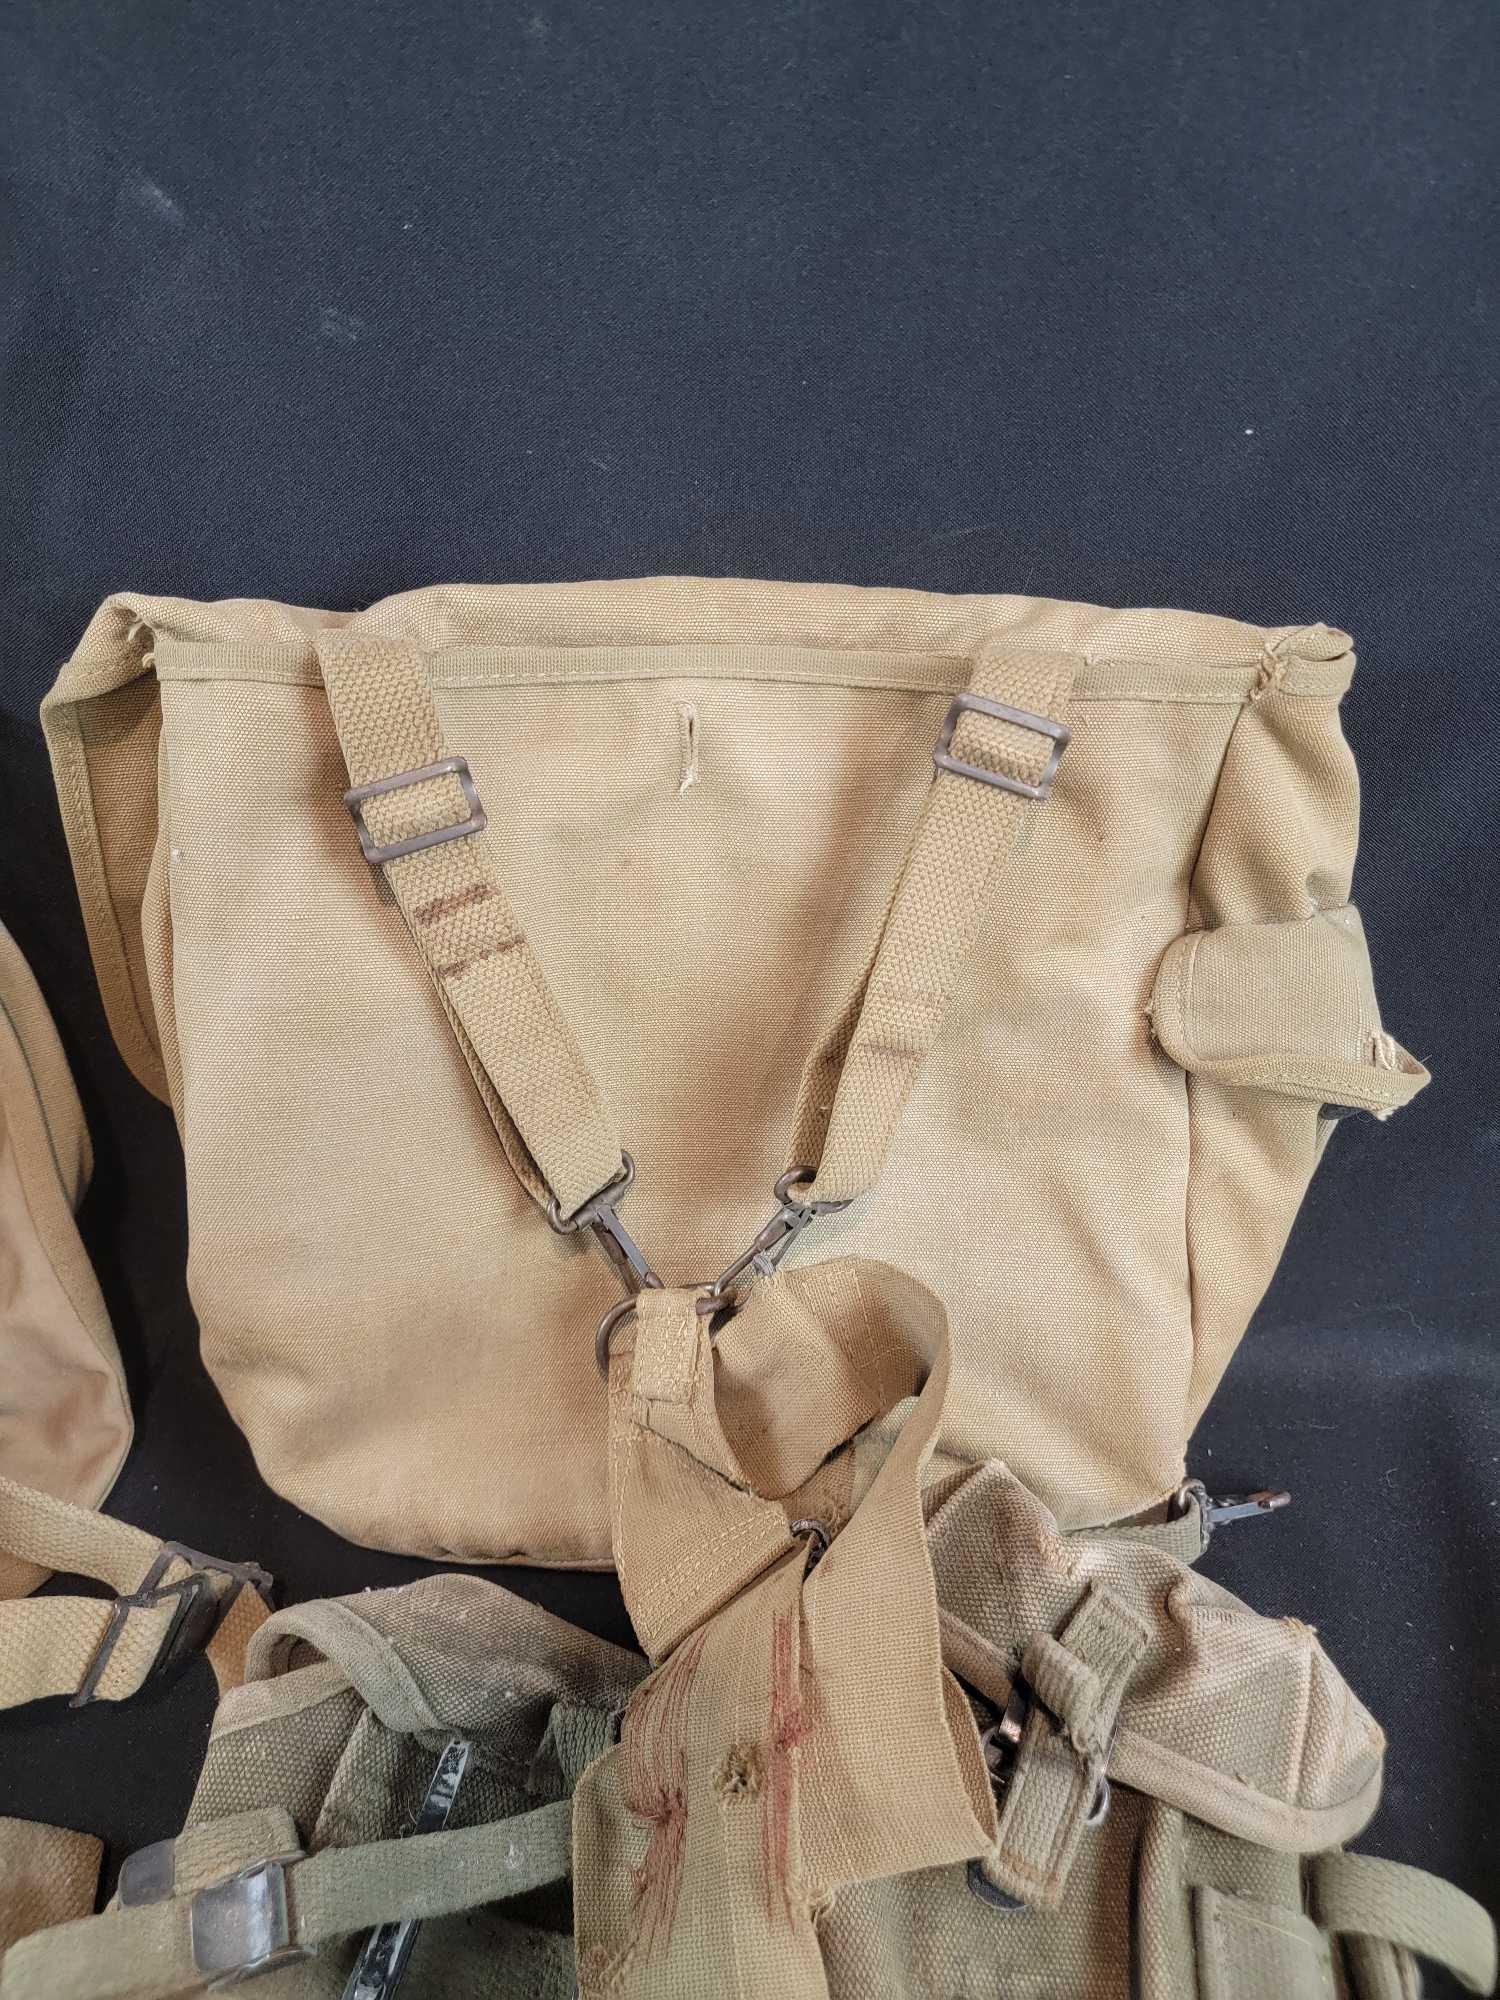 Large Group US Military canvas bags ammo belt canteen mess kit mixed wars WWI WWII WW2